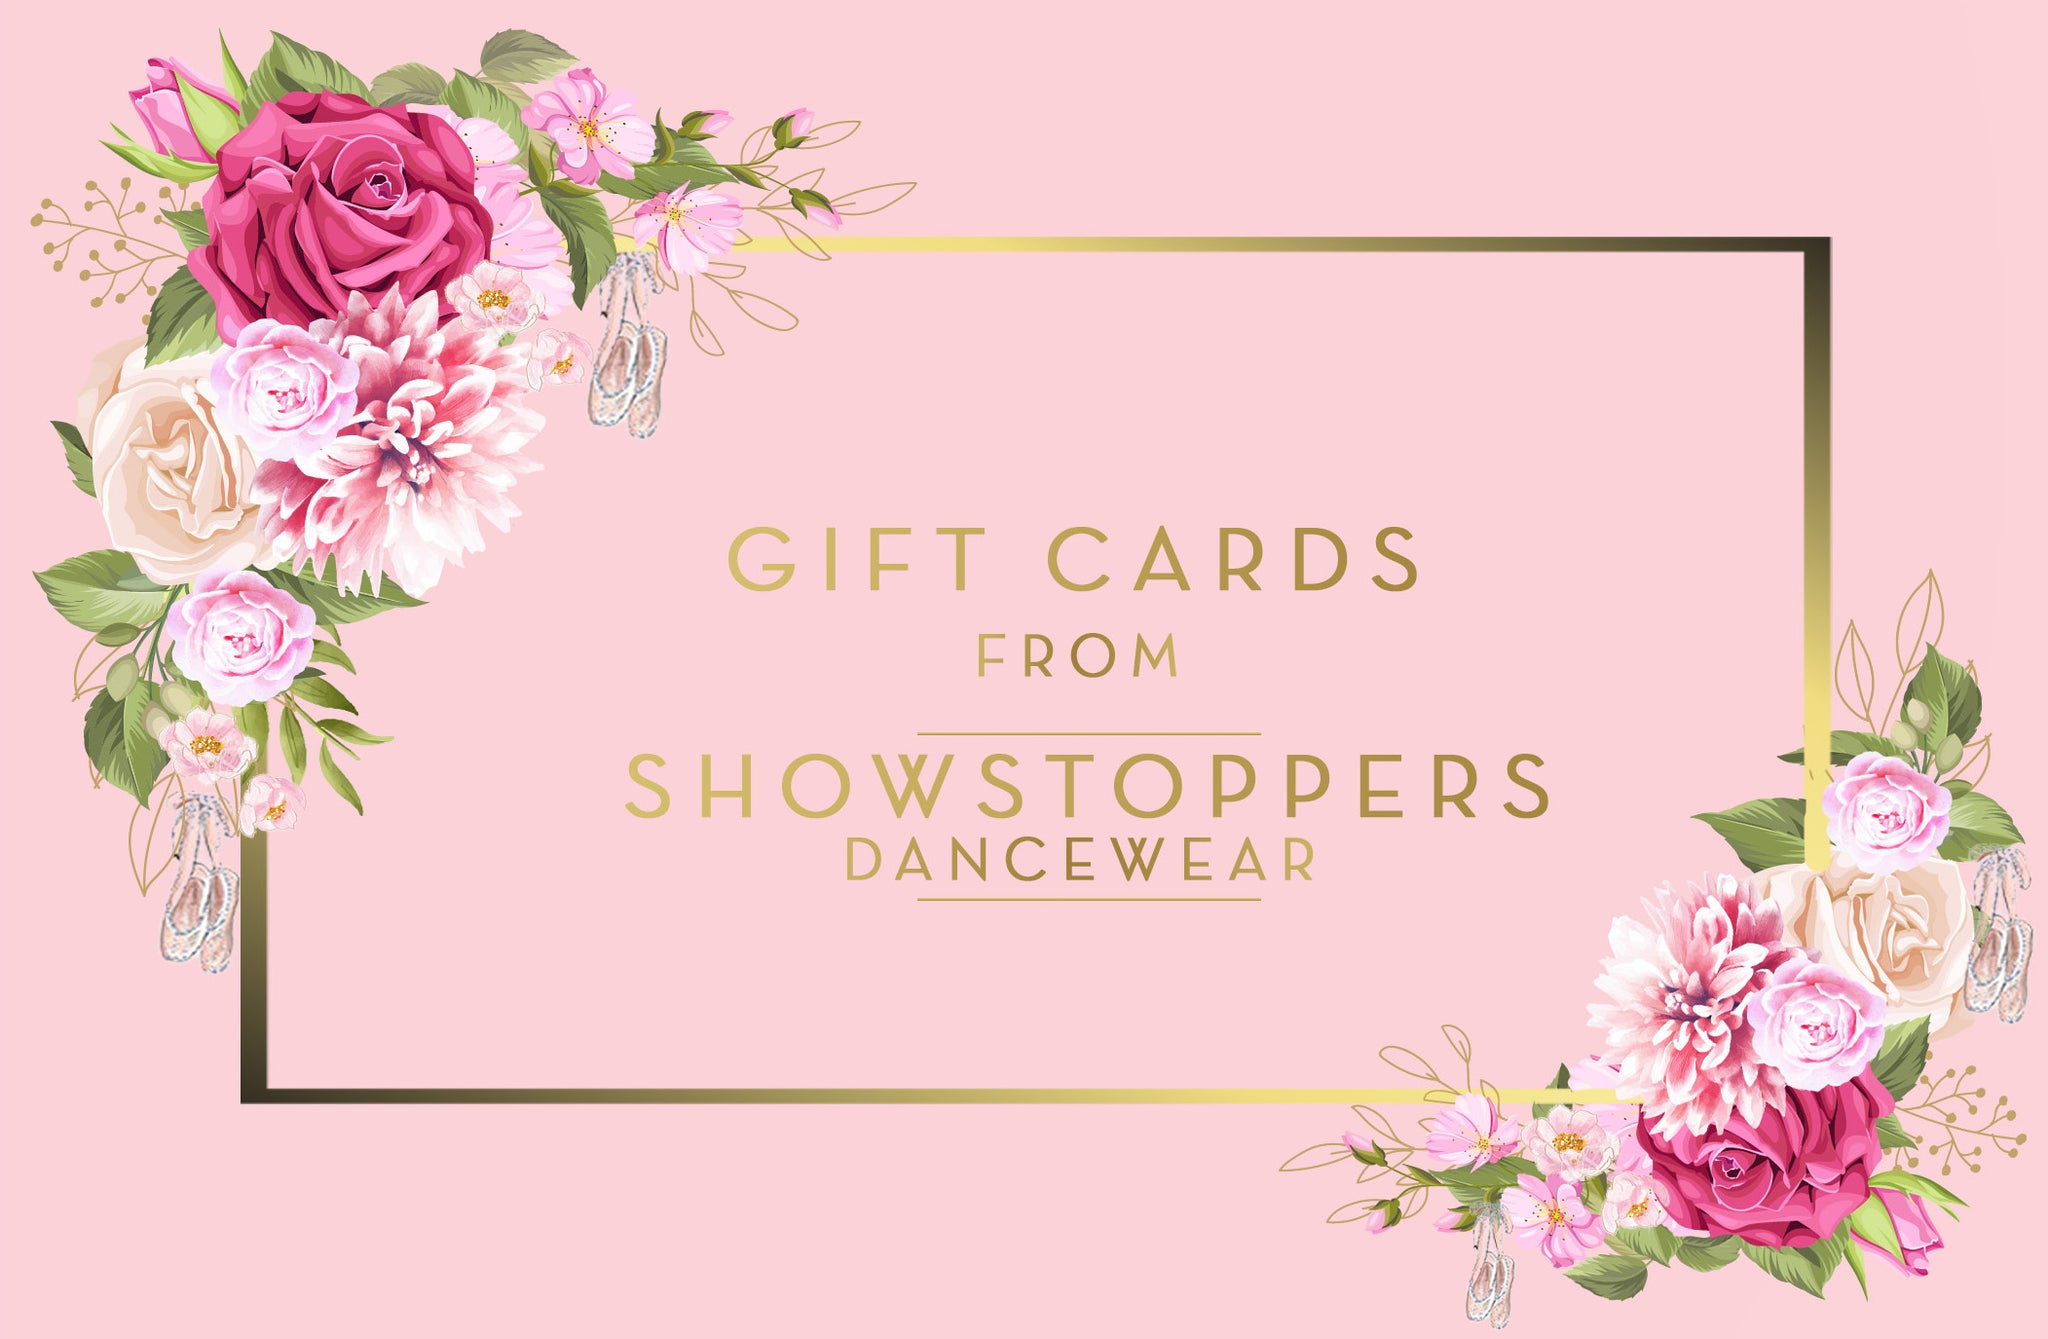 SHOWSTOPPERS DANCEWEAR E-GIFT CARDS